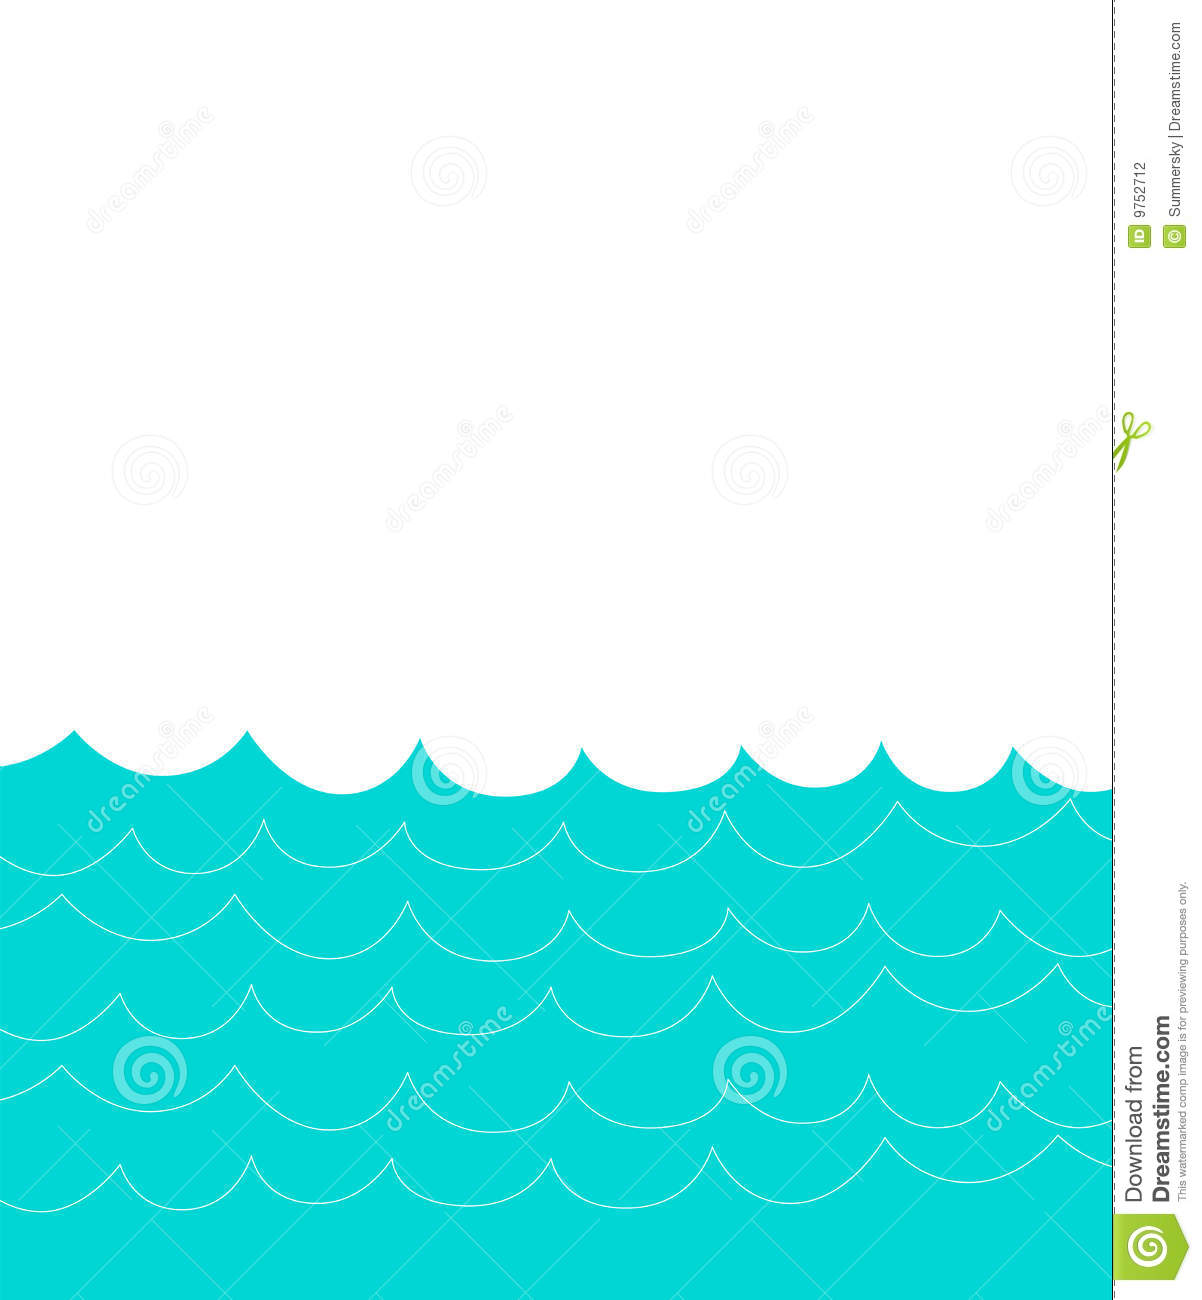 Simple Water Waves Clip Art Images   Pictures   Becuo